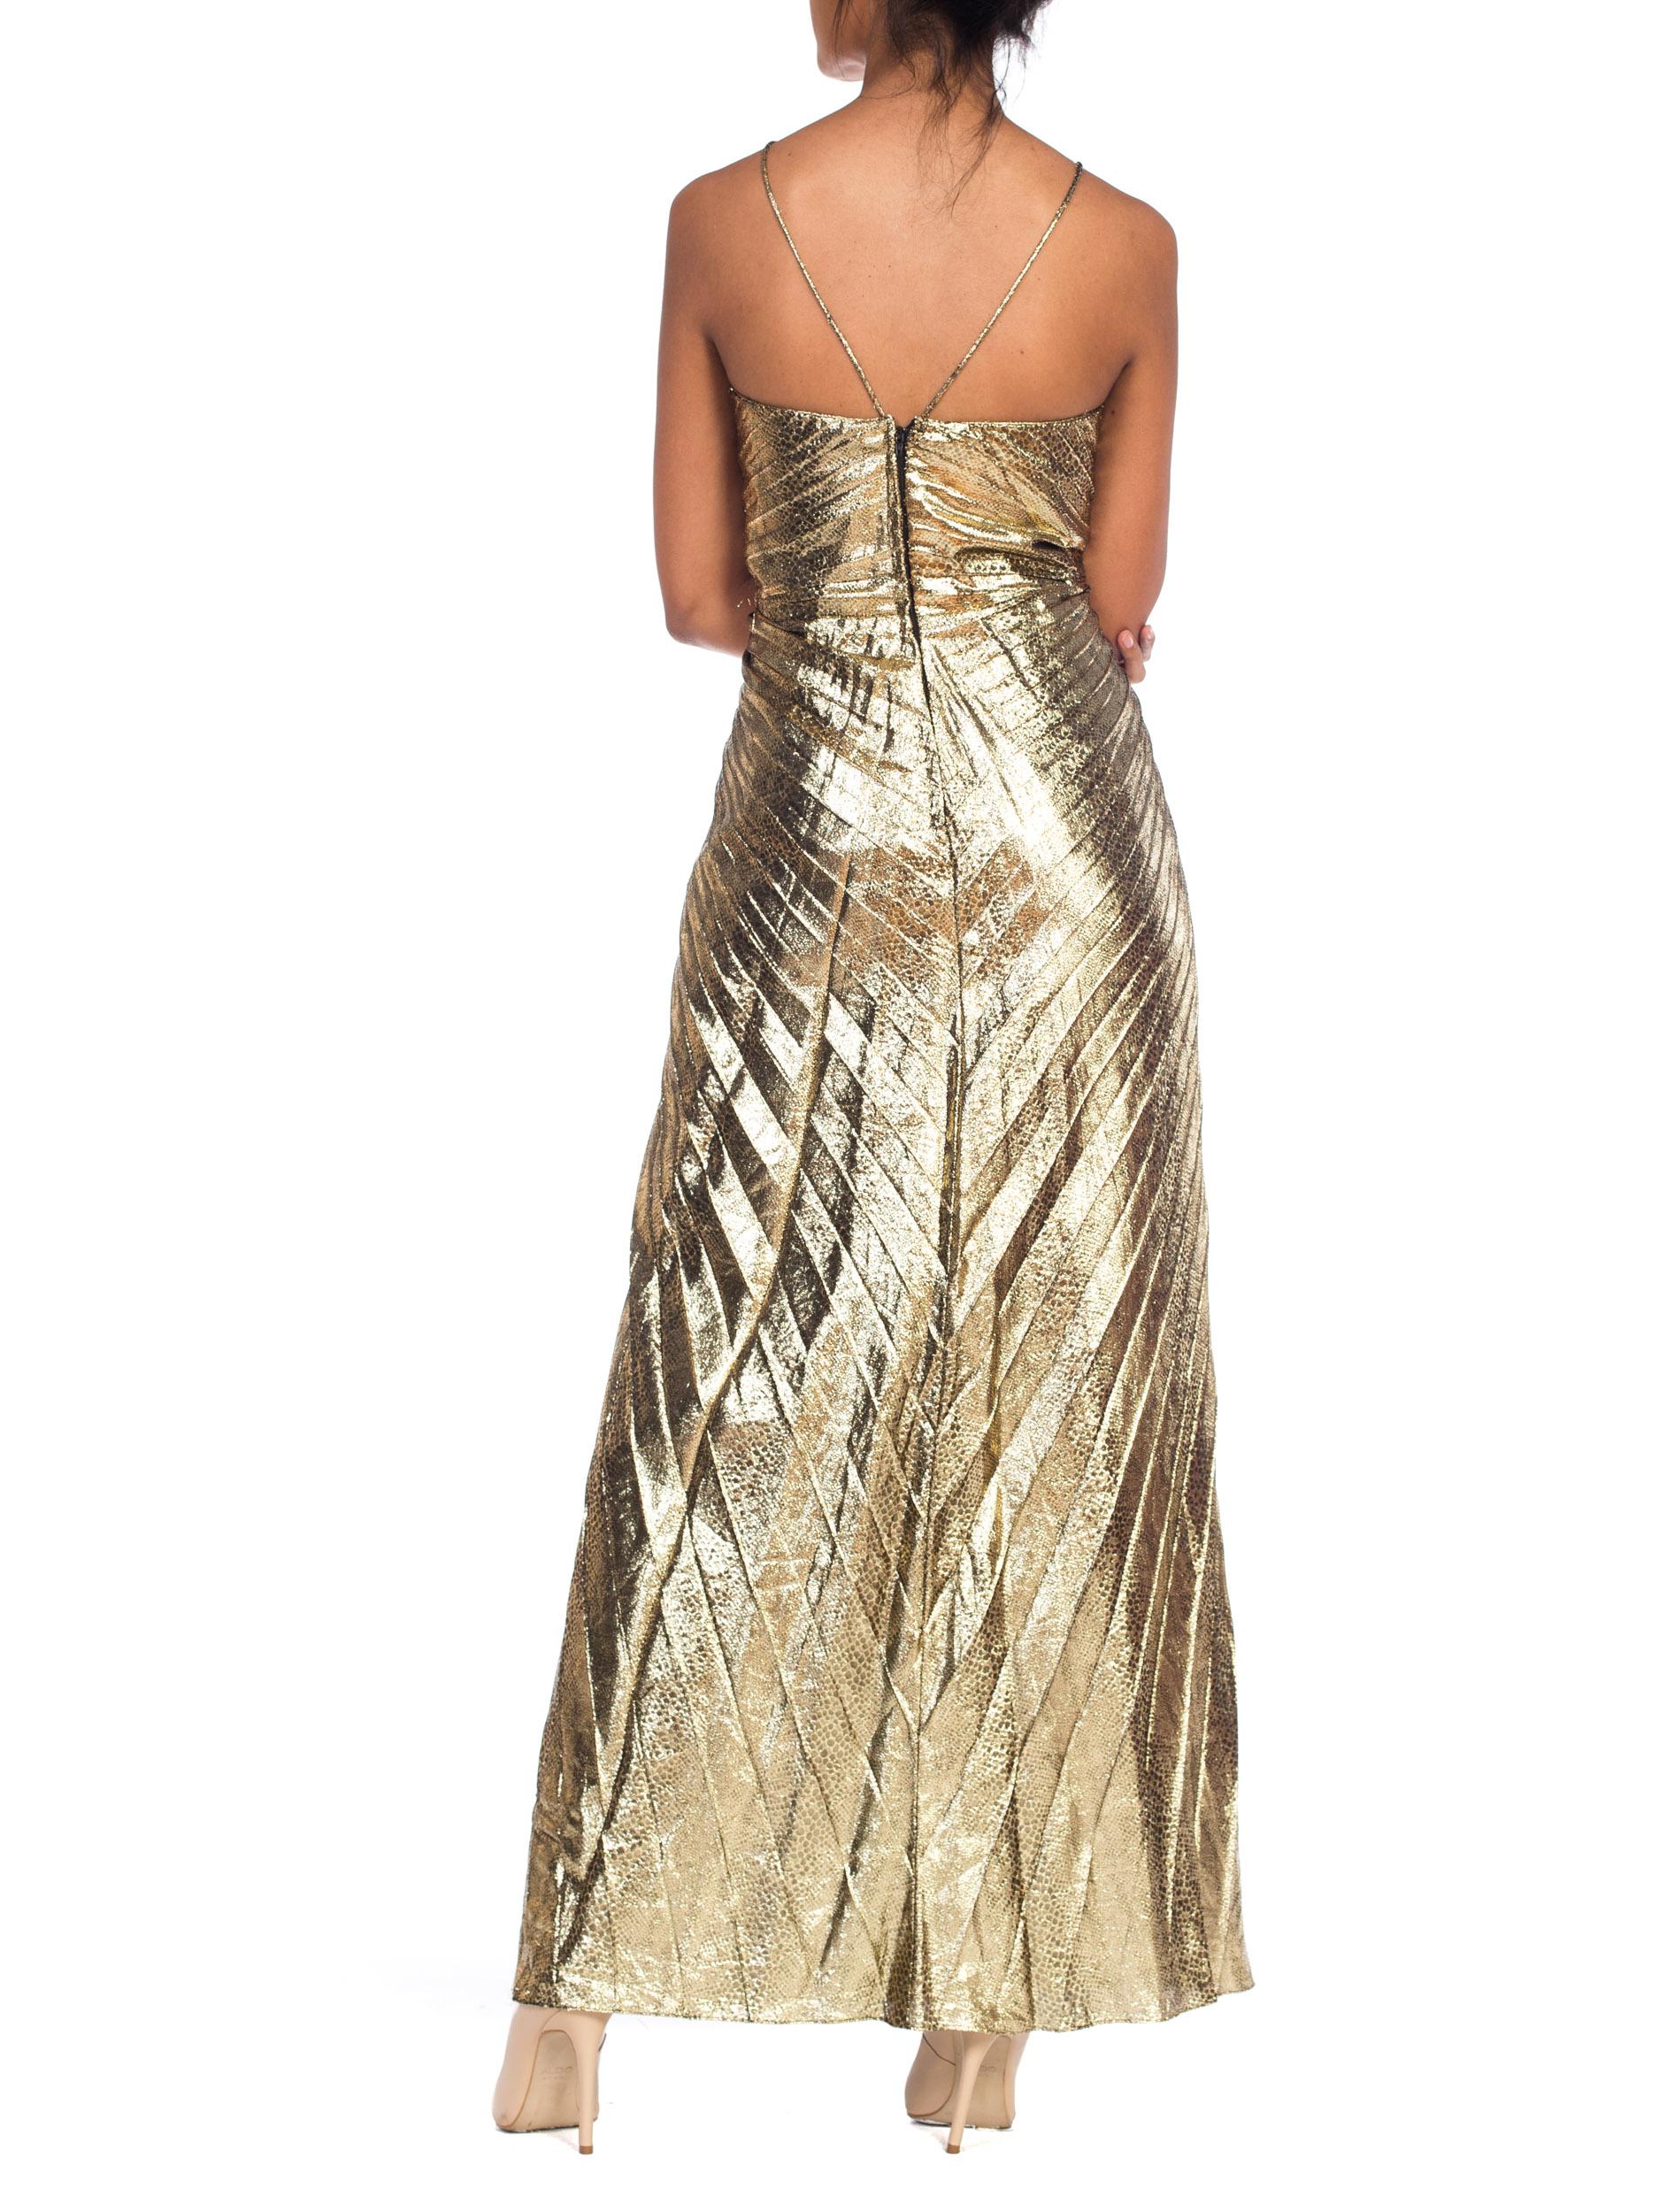 Iconic Travilla Gold Lamé Marilyn Monroe Disco Halter Gown at 1stDibs